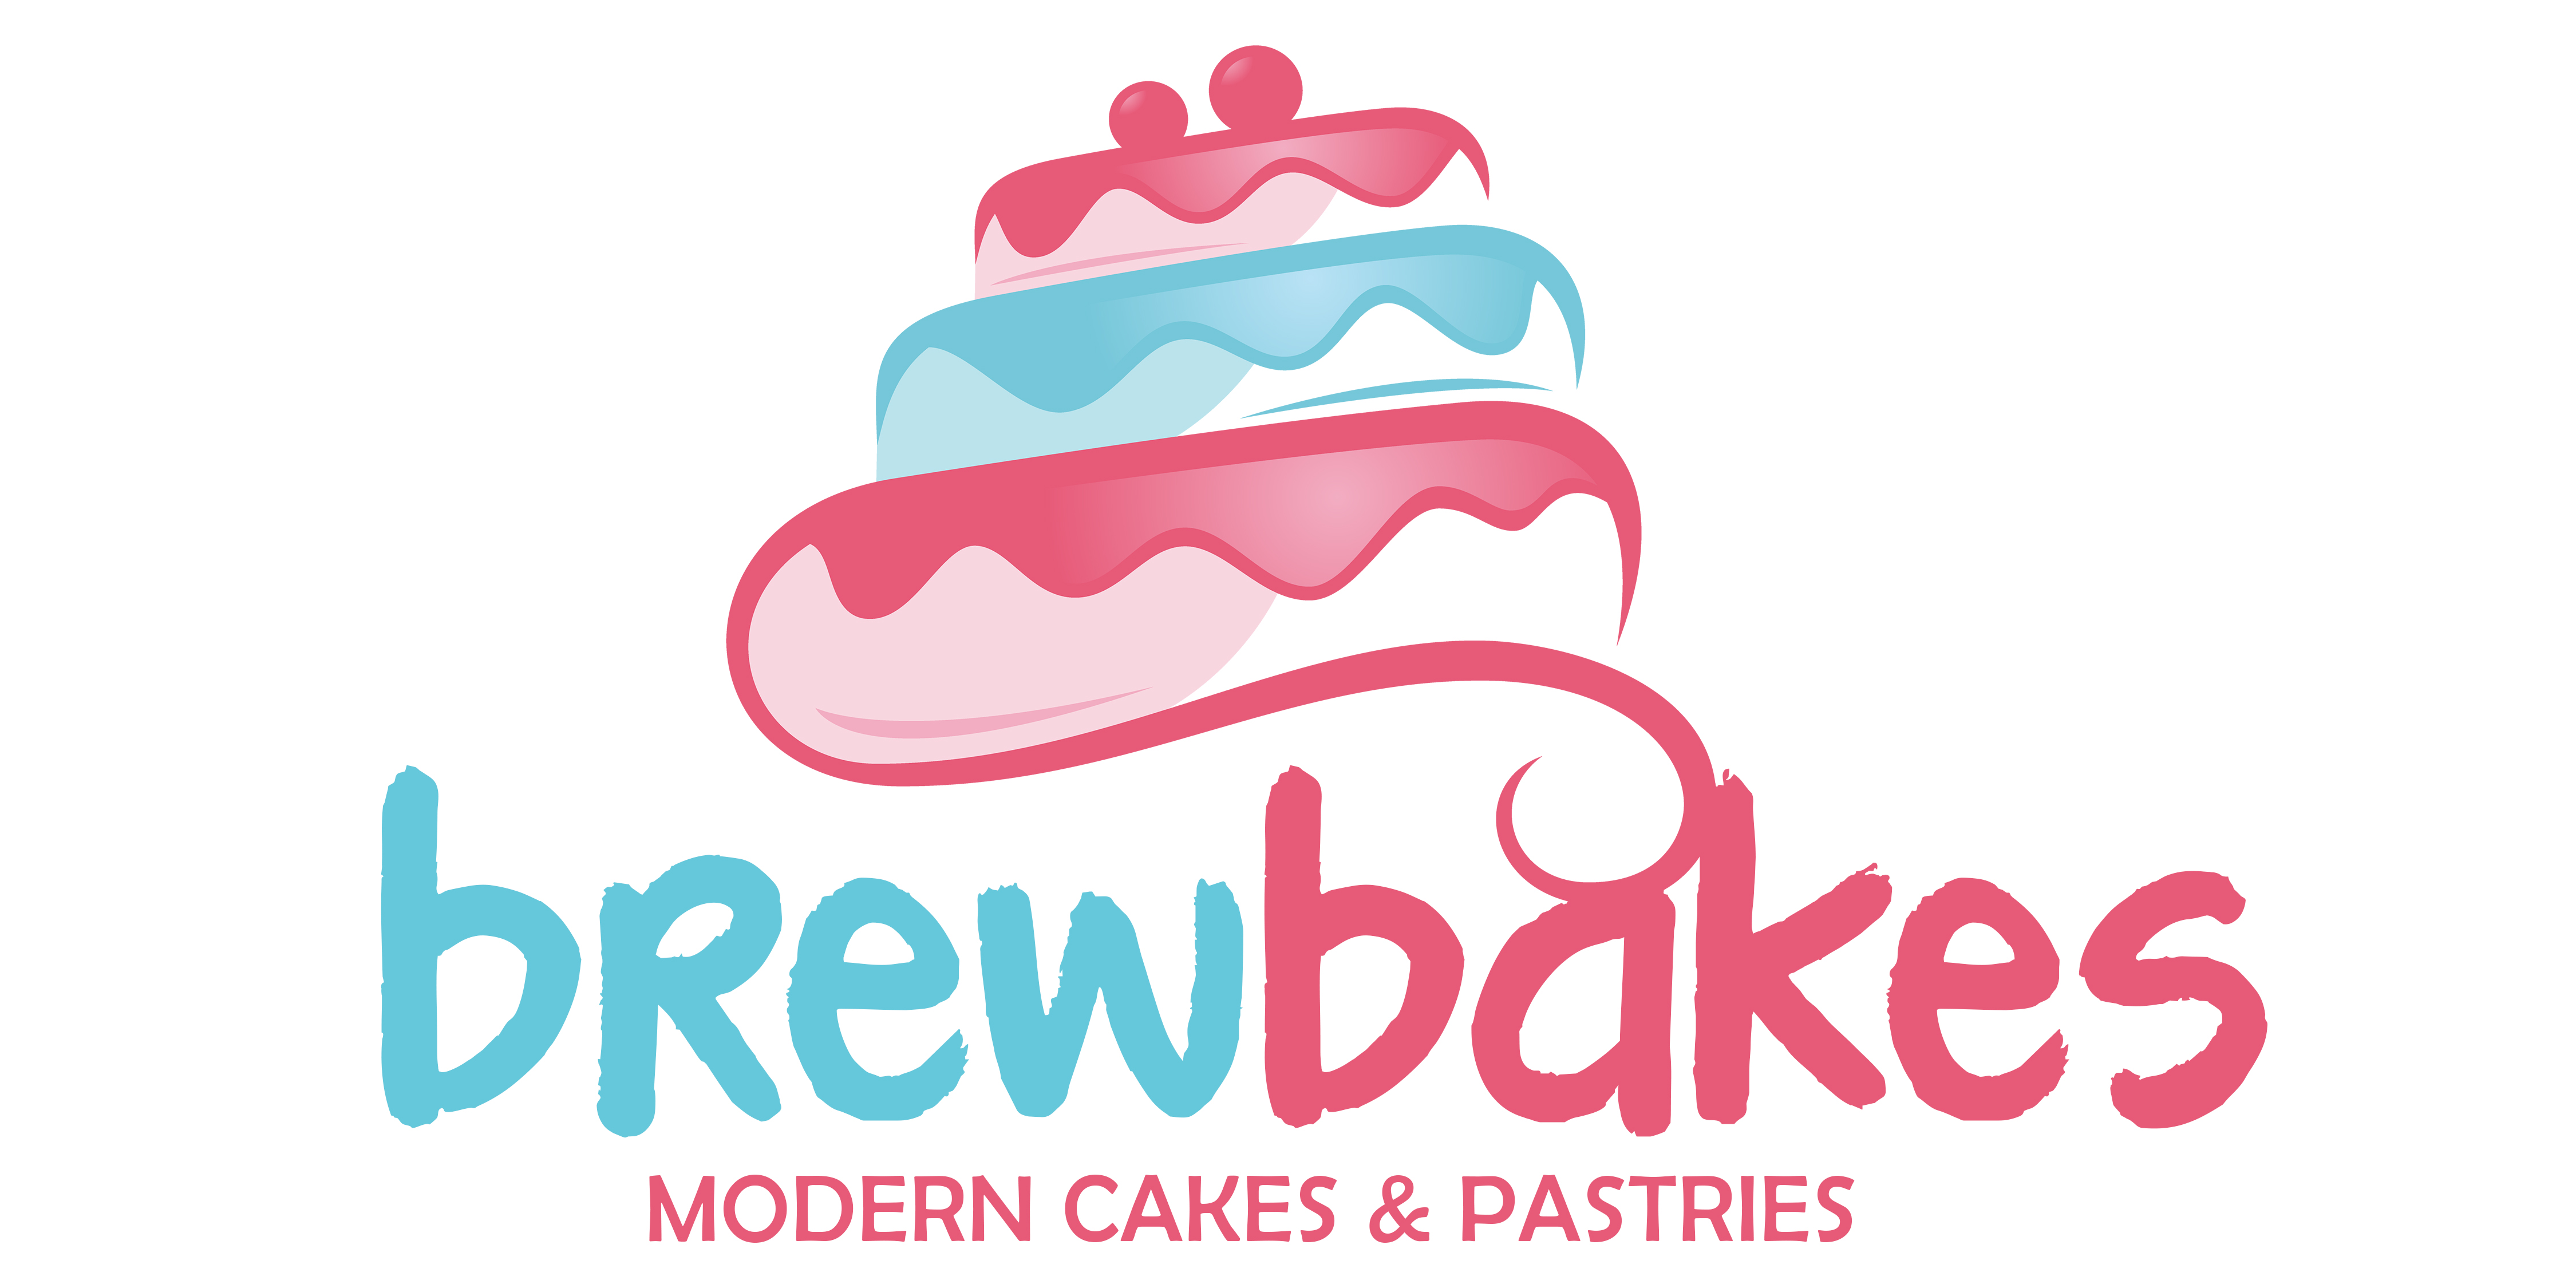 Franchise oppurtunities of Brewbakes Cakes & Pastries